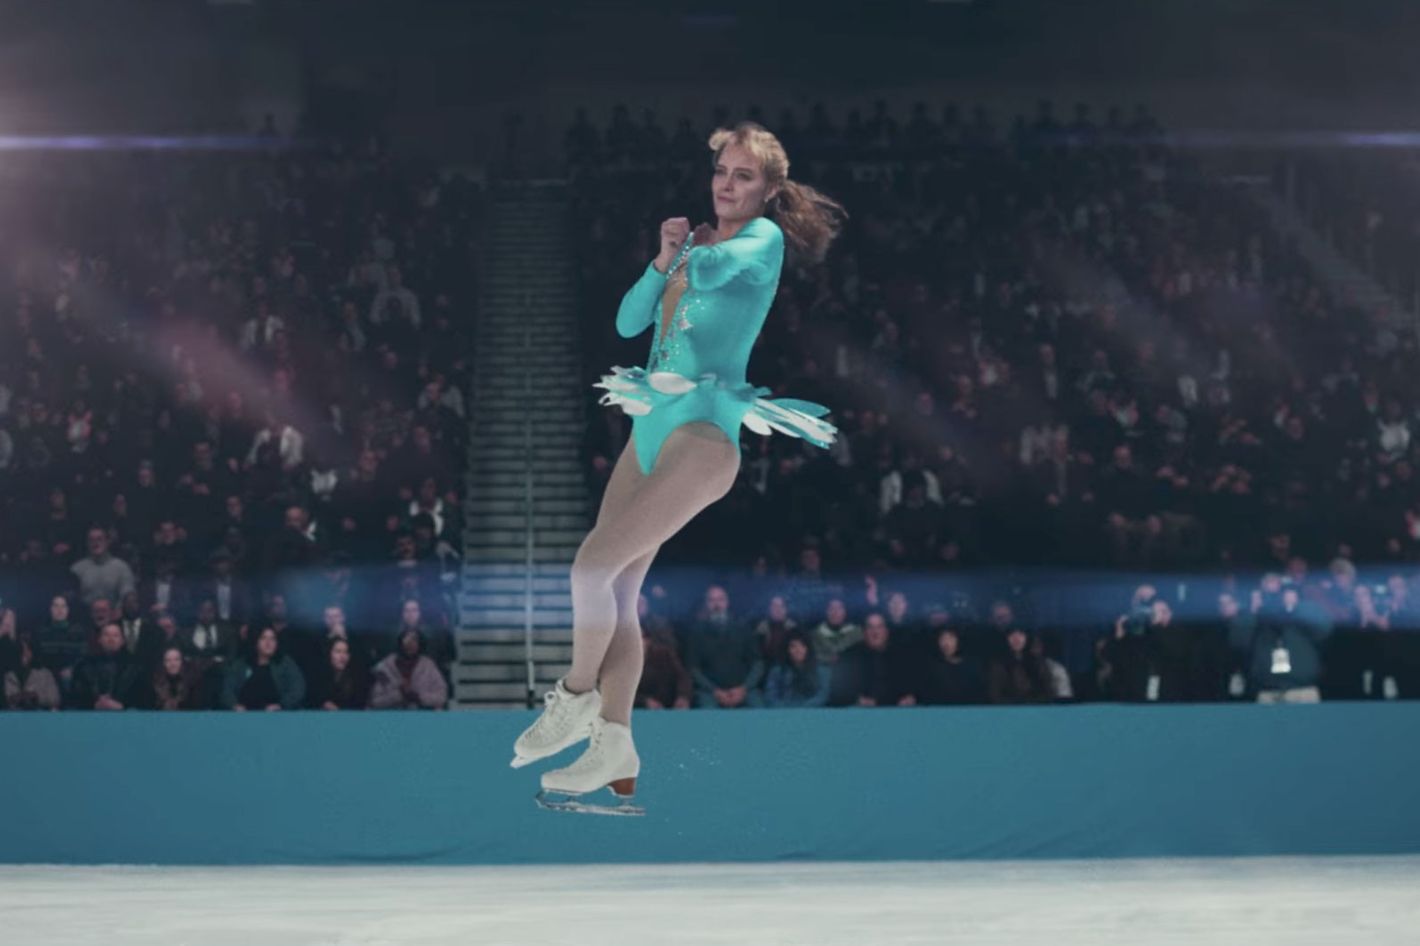 We Got Video Of Margot Robbie On The Ice Practicing For Tonya Harding Flick